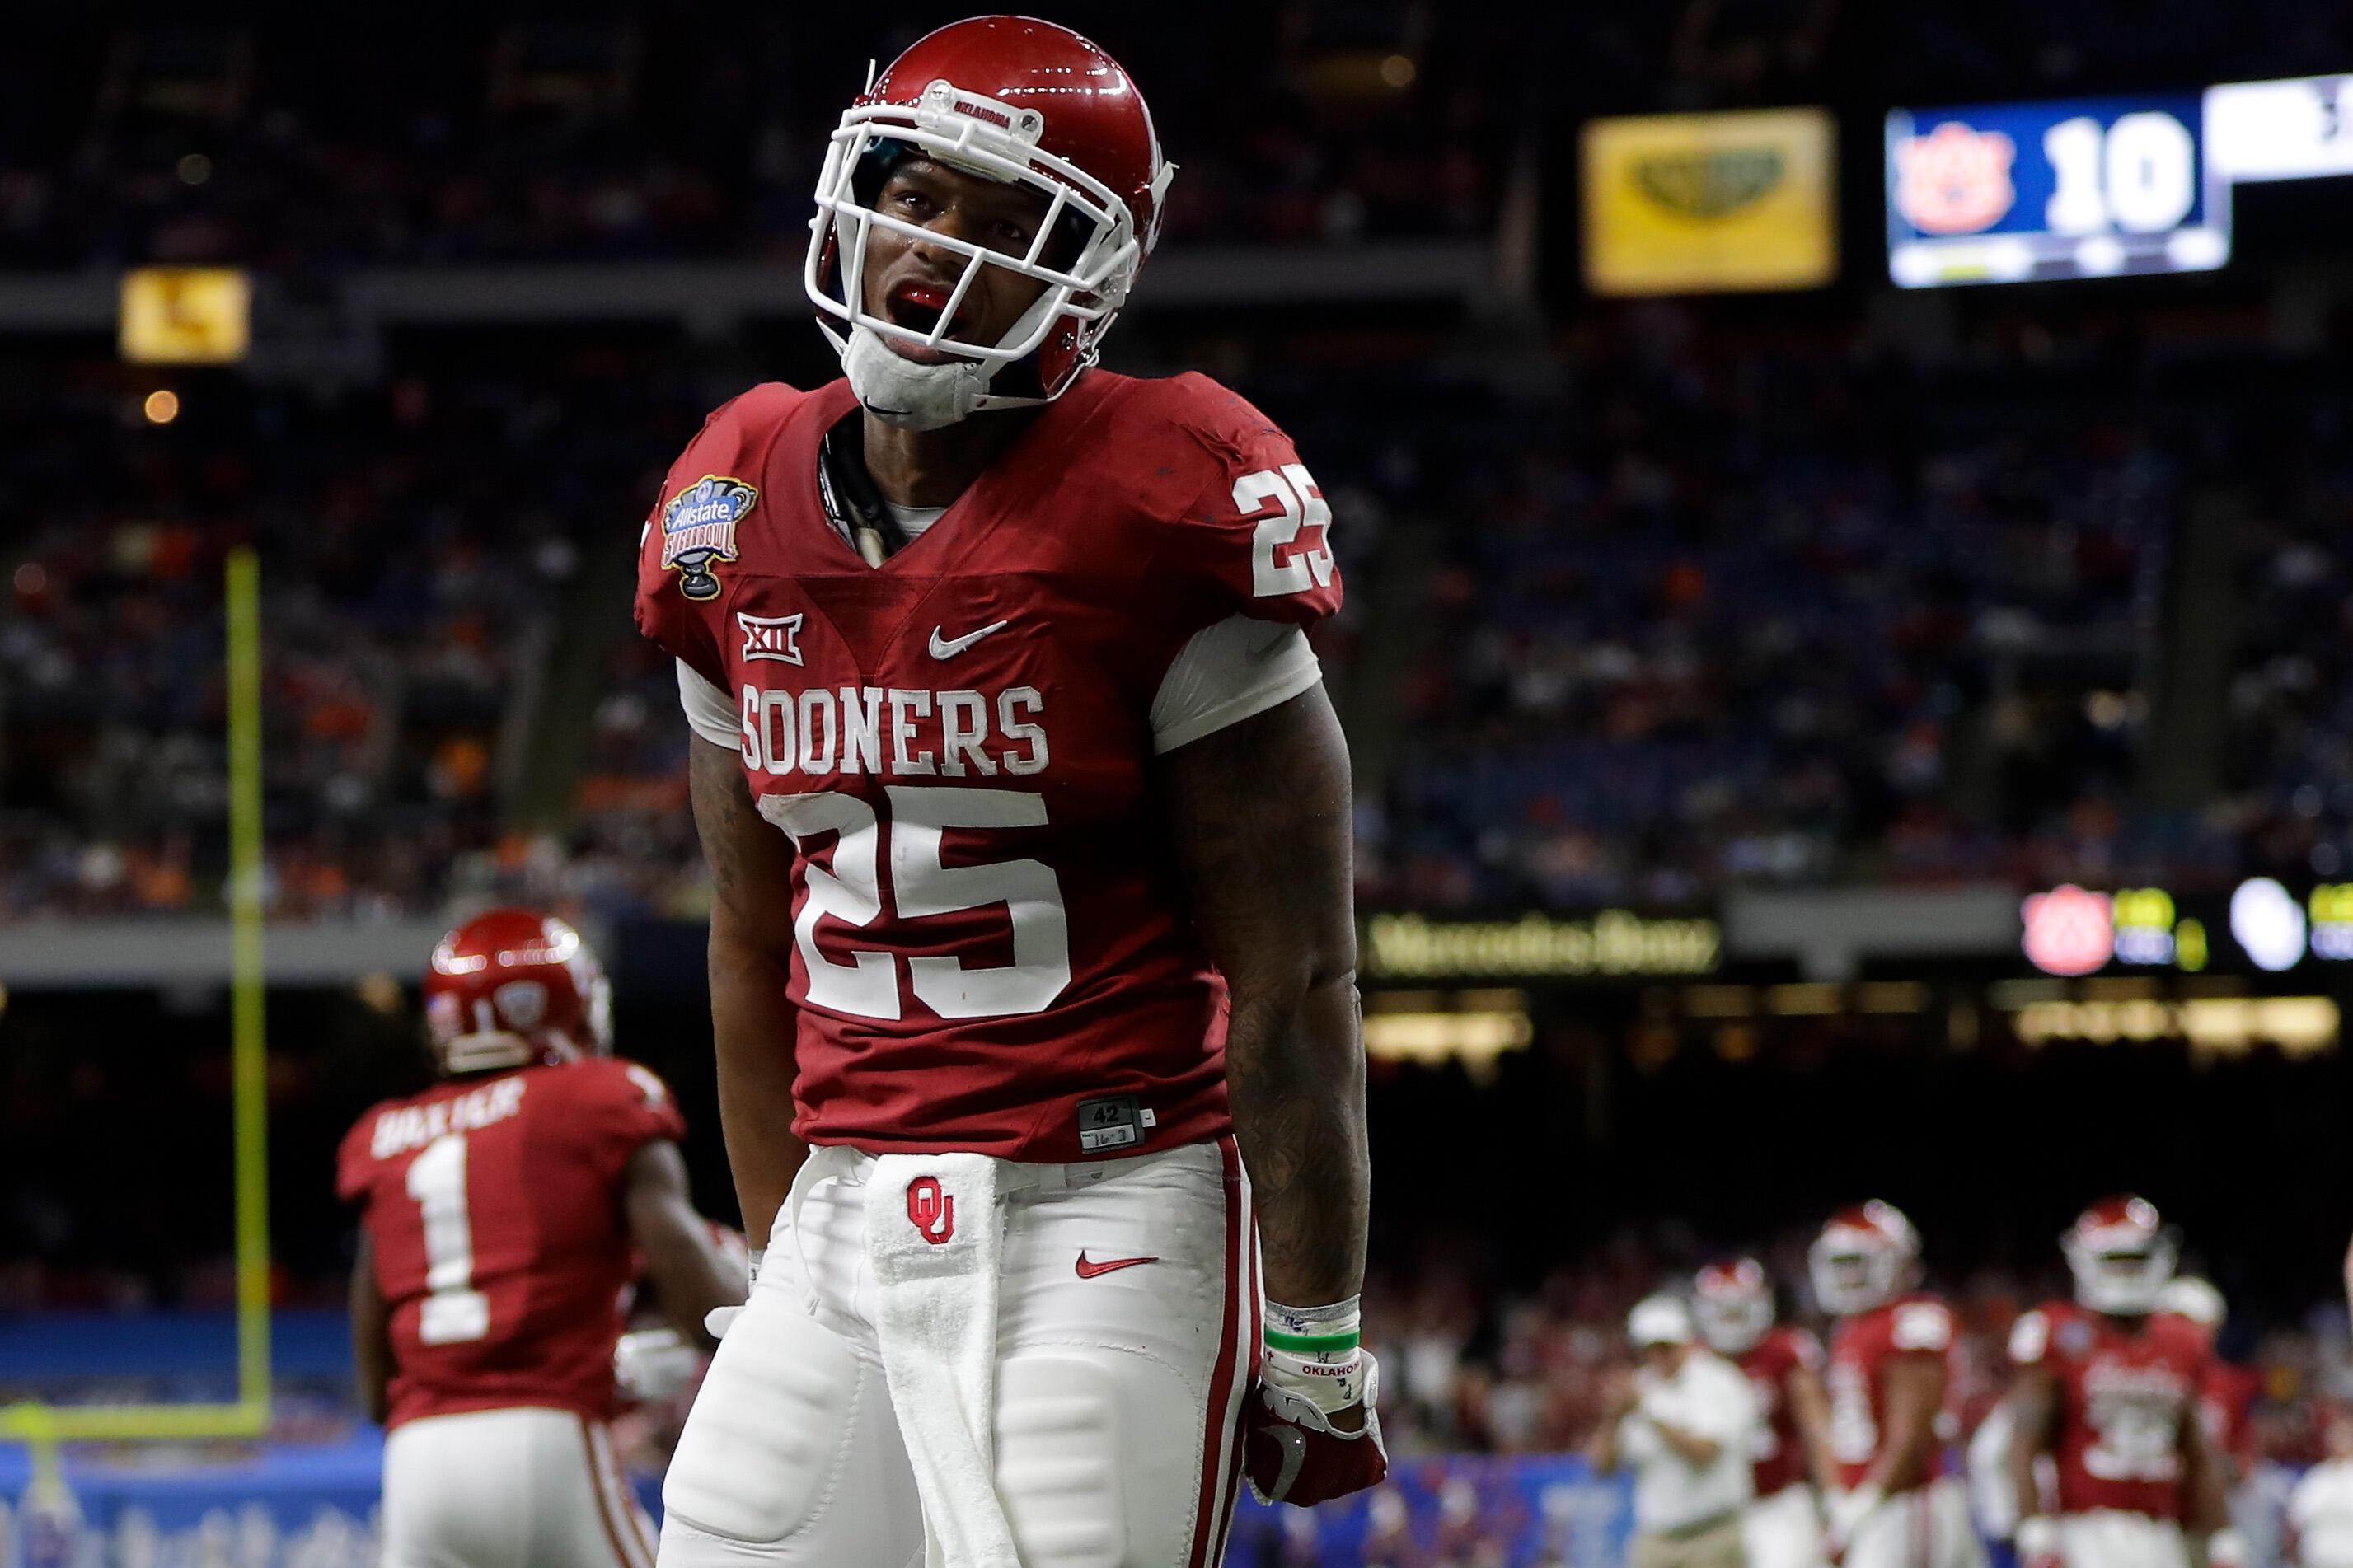 NEW ORLEANS, LA - JANUARY 02:  Joe Mixon #25 of the Oklahoma Sooners reacts after scoring a touchdown against the Auburn Tigers during the Allstate Sugar Bowl at the Mercedes-Benz Superdome on January 2, 2017 in New Orleans, Louisiana.  (Photo by Sean Gar